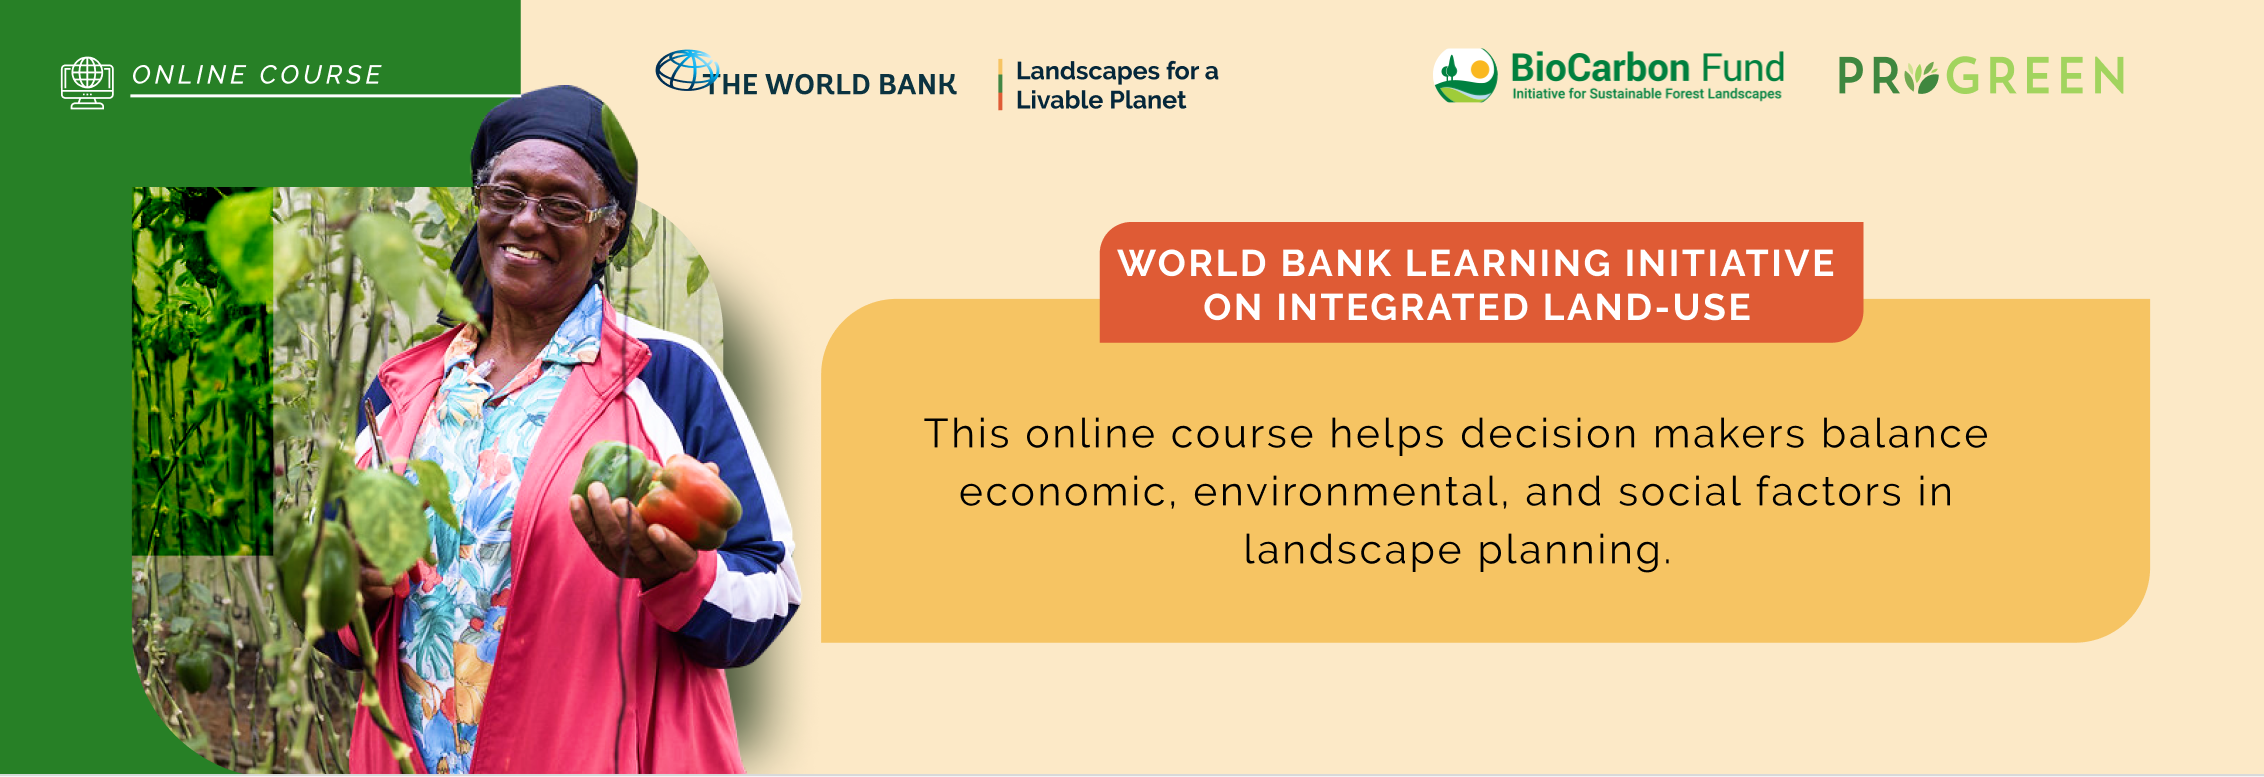 on-line course, integrated land-use initiatives 